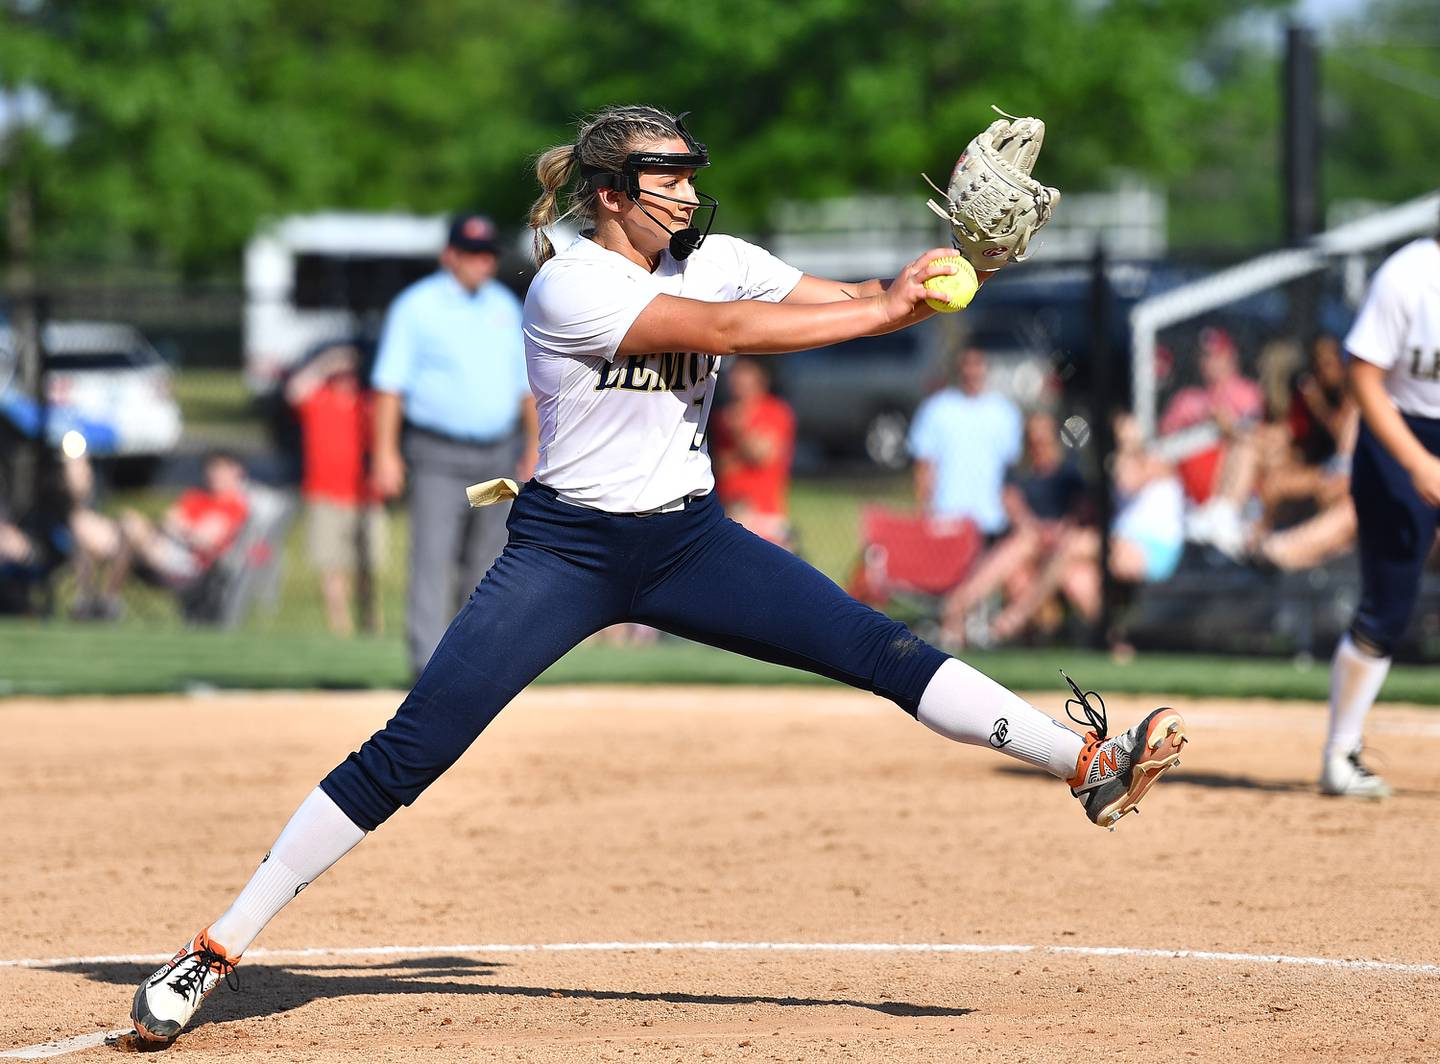 Lemont's Sage Mardjetko in pitching form during the Lemont Class 3A Sectional Final game against Ottawa on Friday, June 2, 2023, at Lemont.